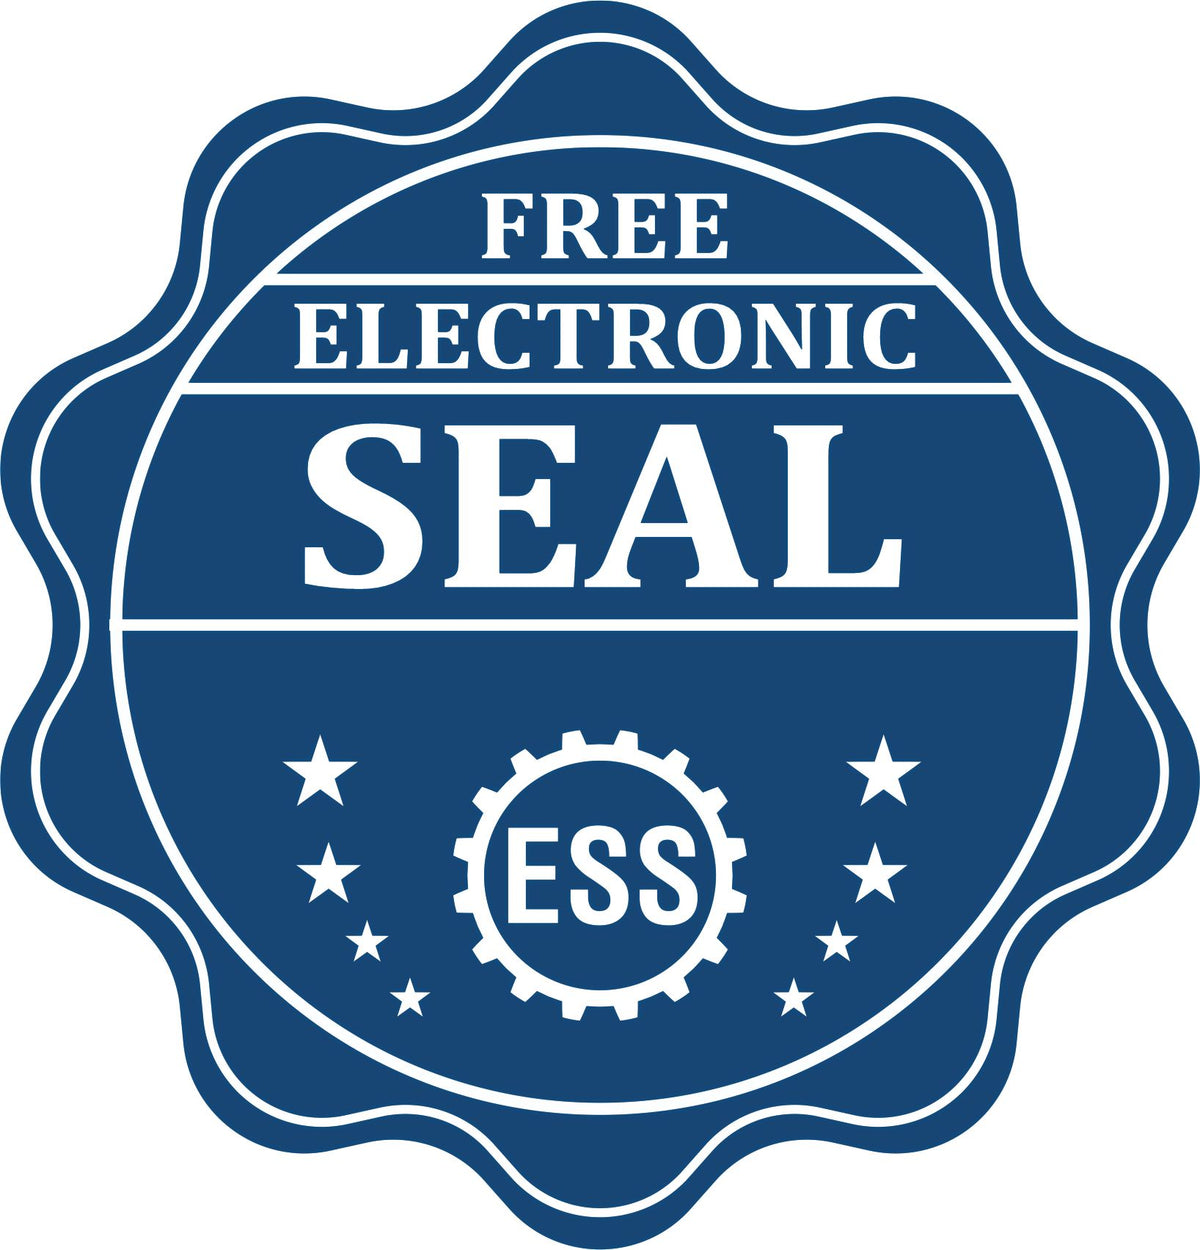 A badge showing a free electronic seal for the Super Slim Michigan Notary Public Stamp with stars and the ESS gear on the emblem.